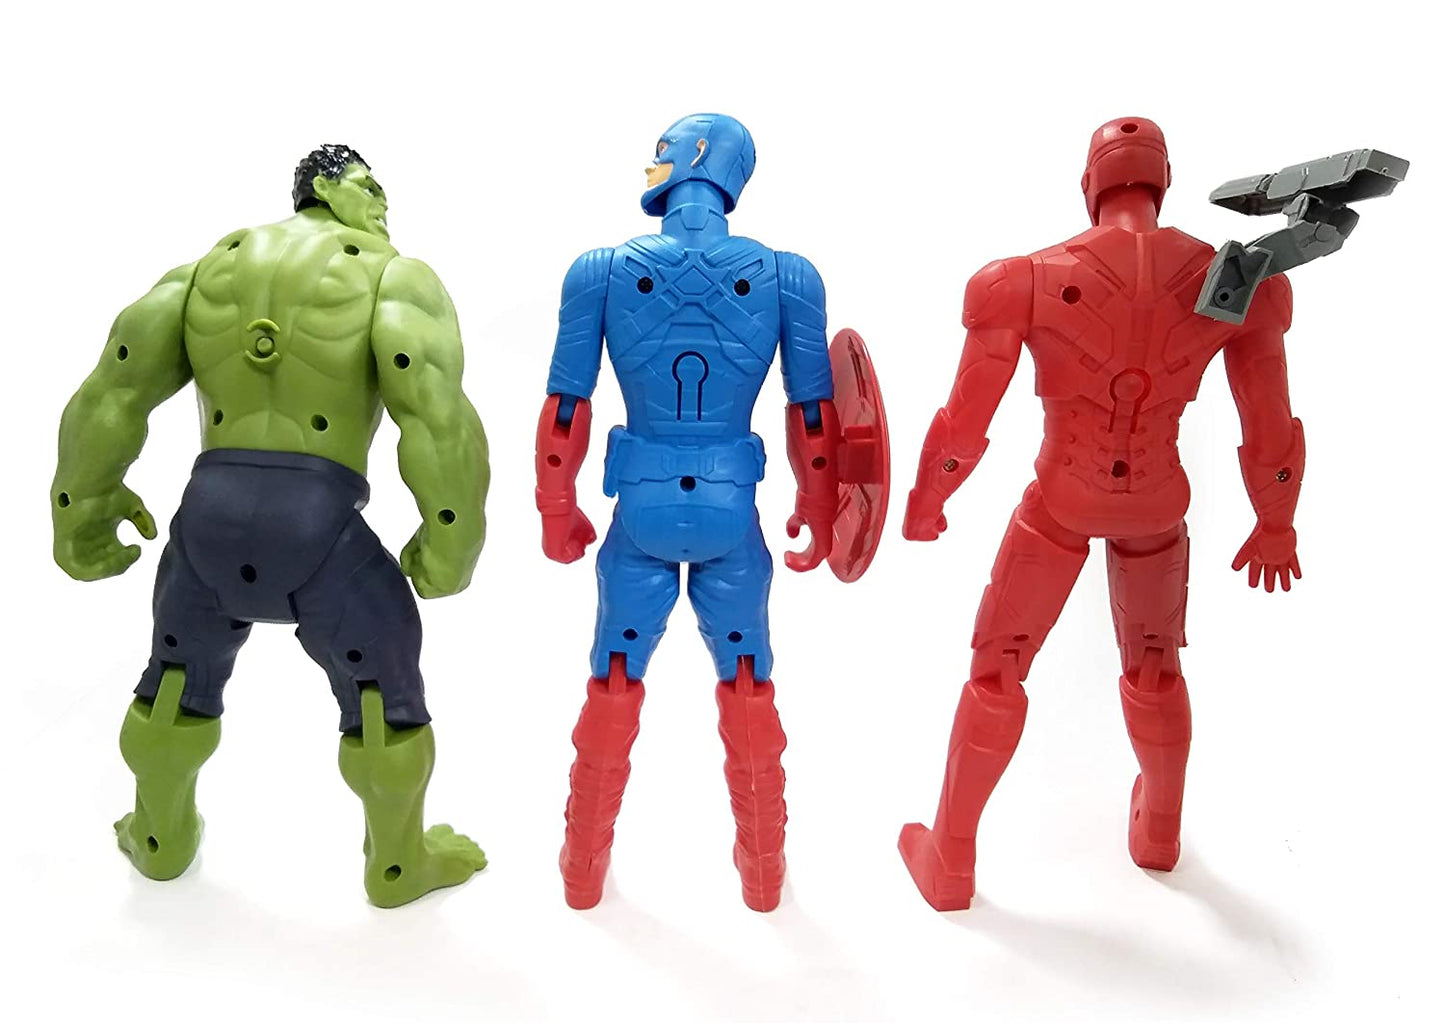 Avengers Superhero's 12 Inch - 3 Pcs Set with Lights, Collectible Action Figures, Perfect for Kids - Assorted